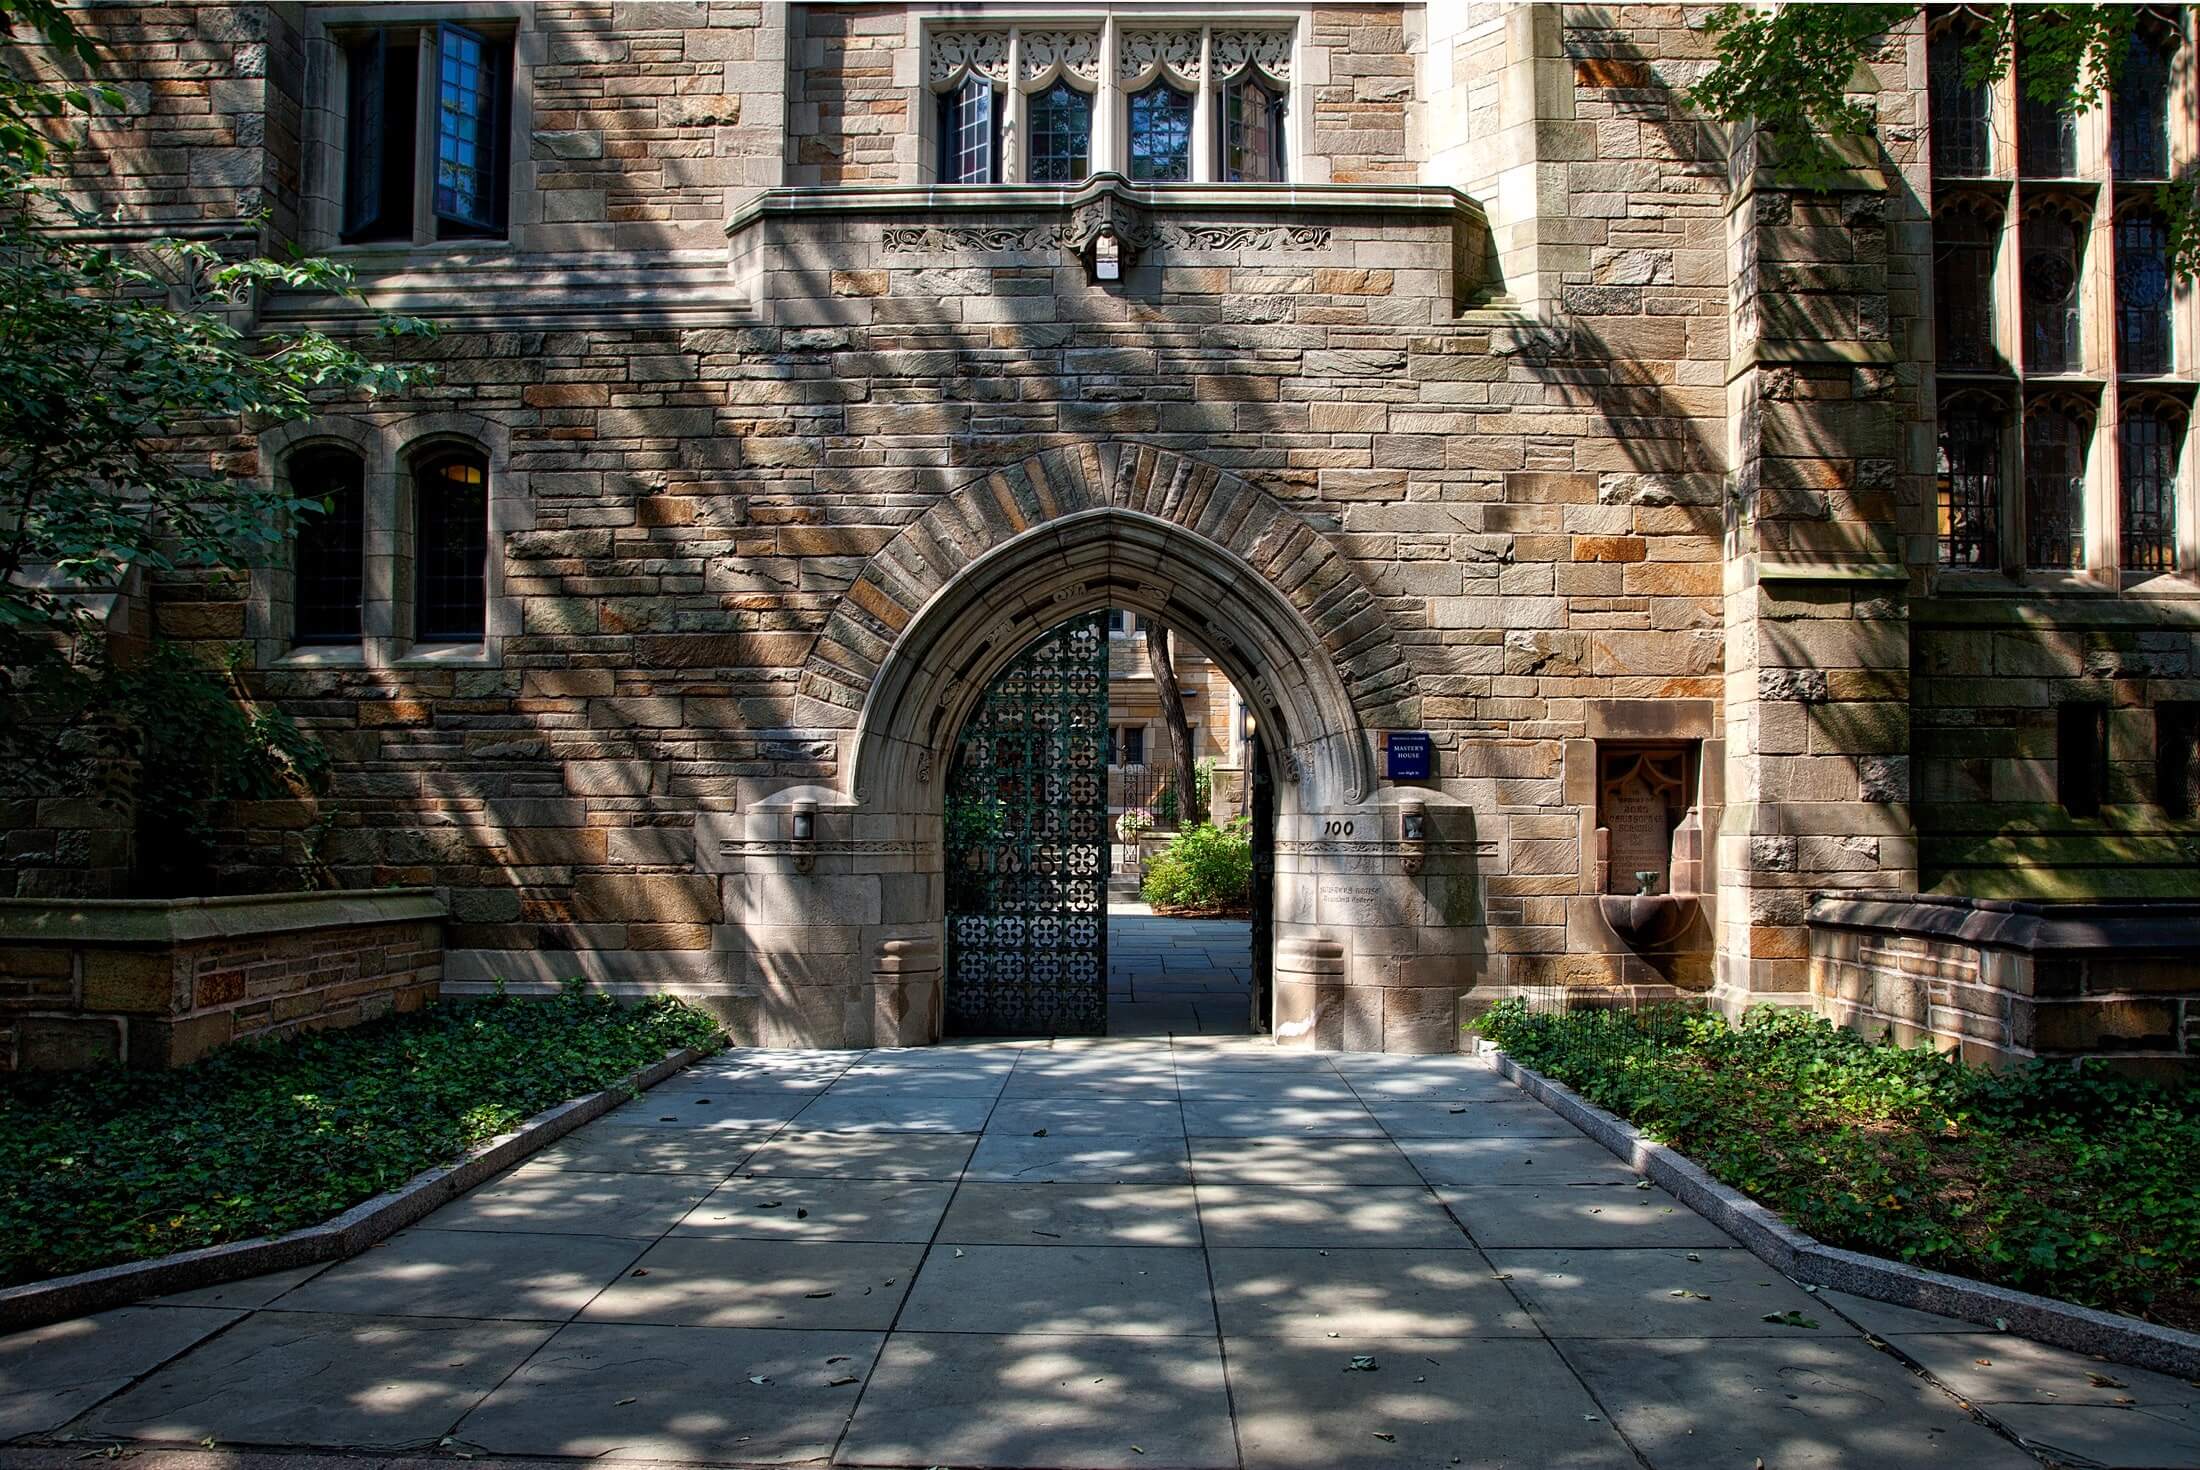 List of Ivy League Universities in USA: Ranking & Fees